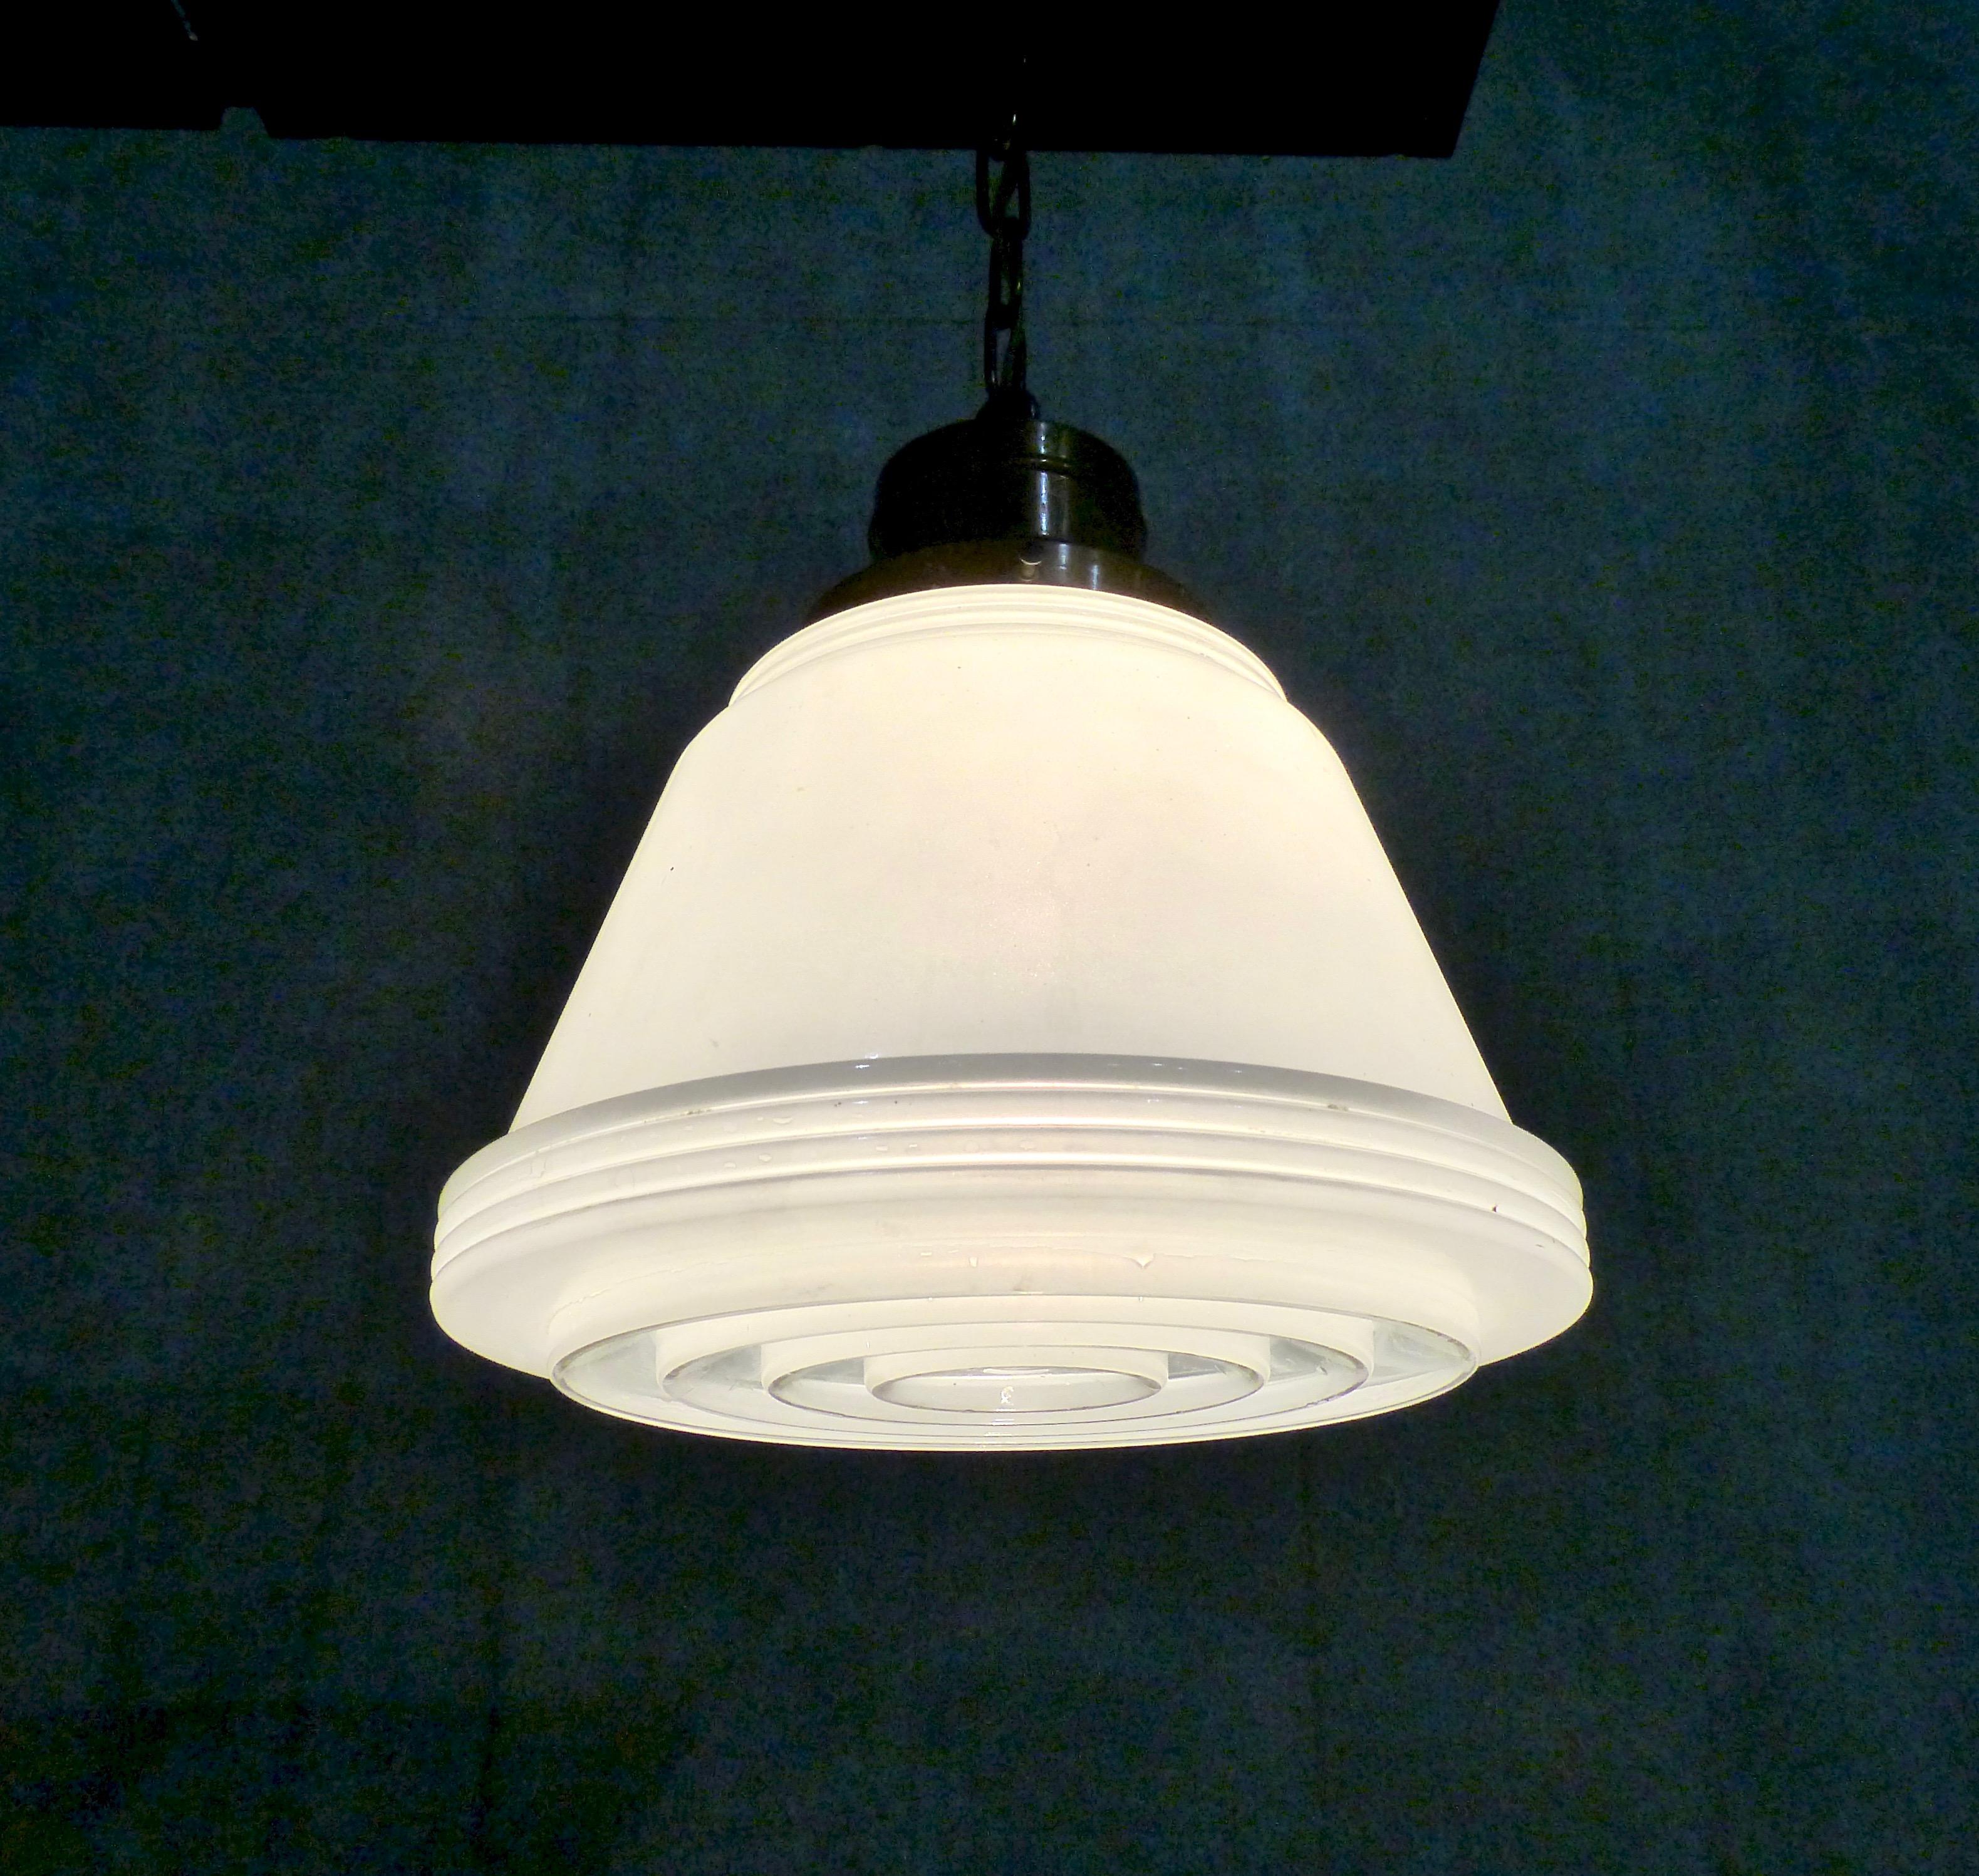 Rare and beautiful Art Deco pendant light with a milk glass shade (with ribbed elements) along with a clear and milk glass ribbed diffuser. Original copper fitter with chain. Re-wired and CSA approved to current electrical standards; ceiling